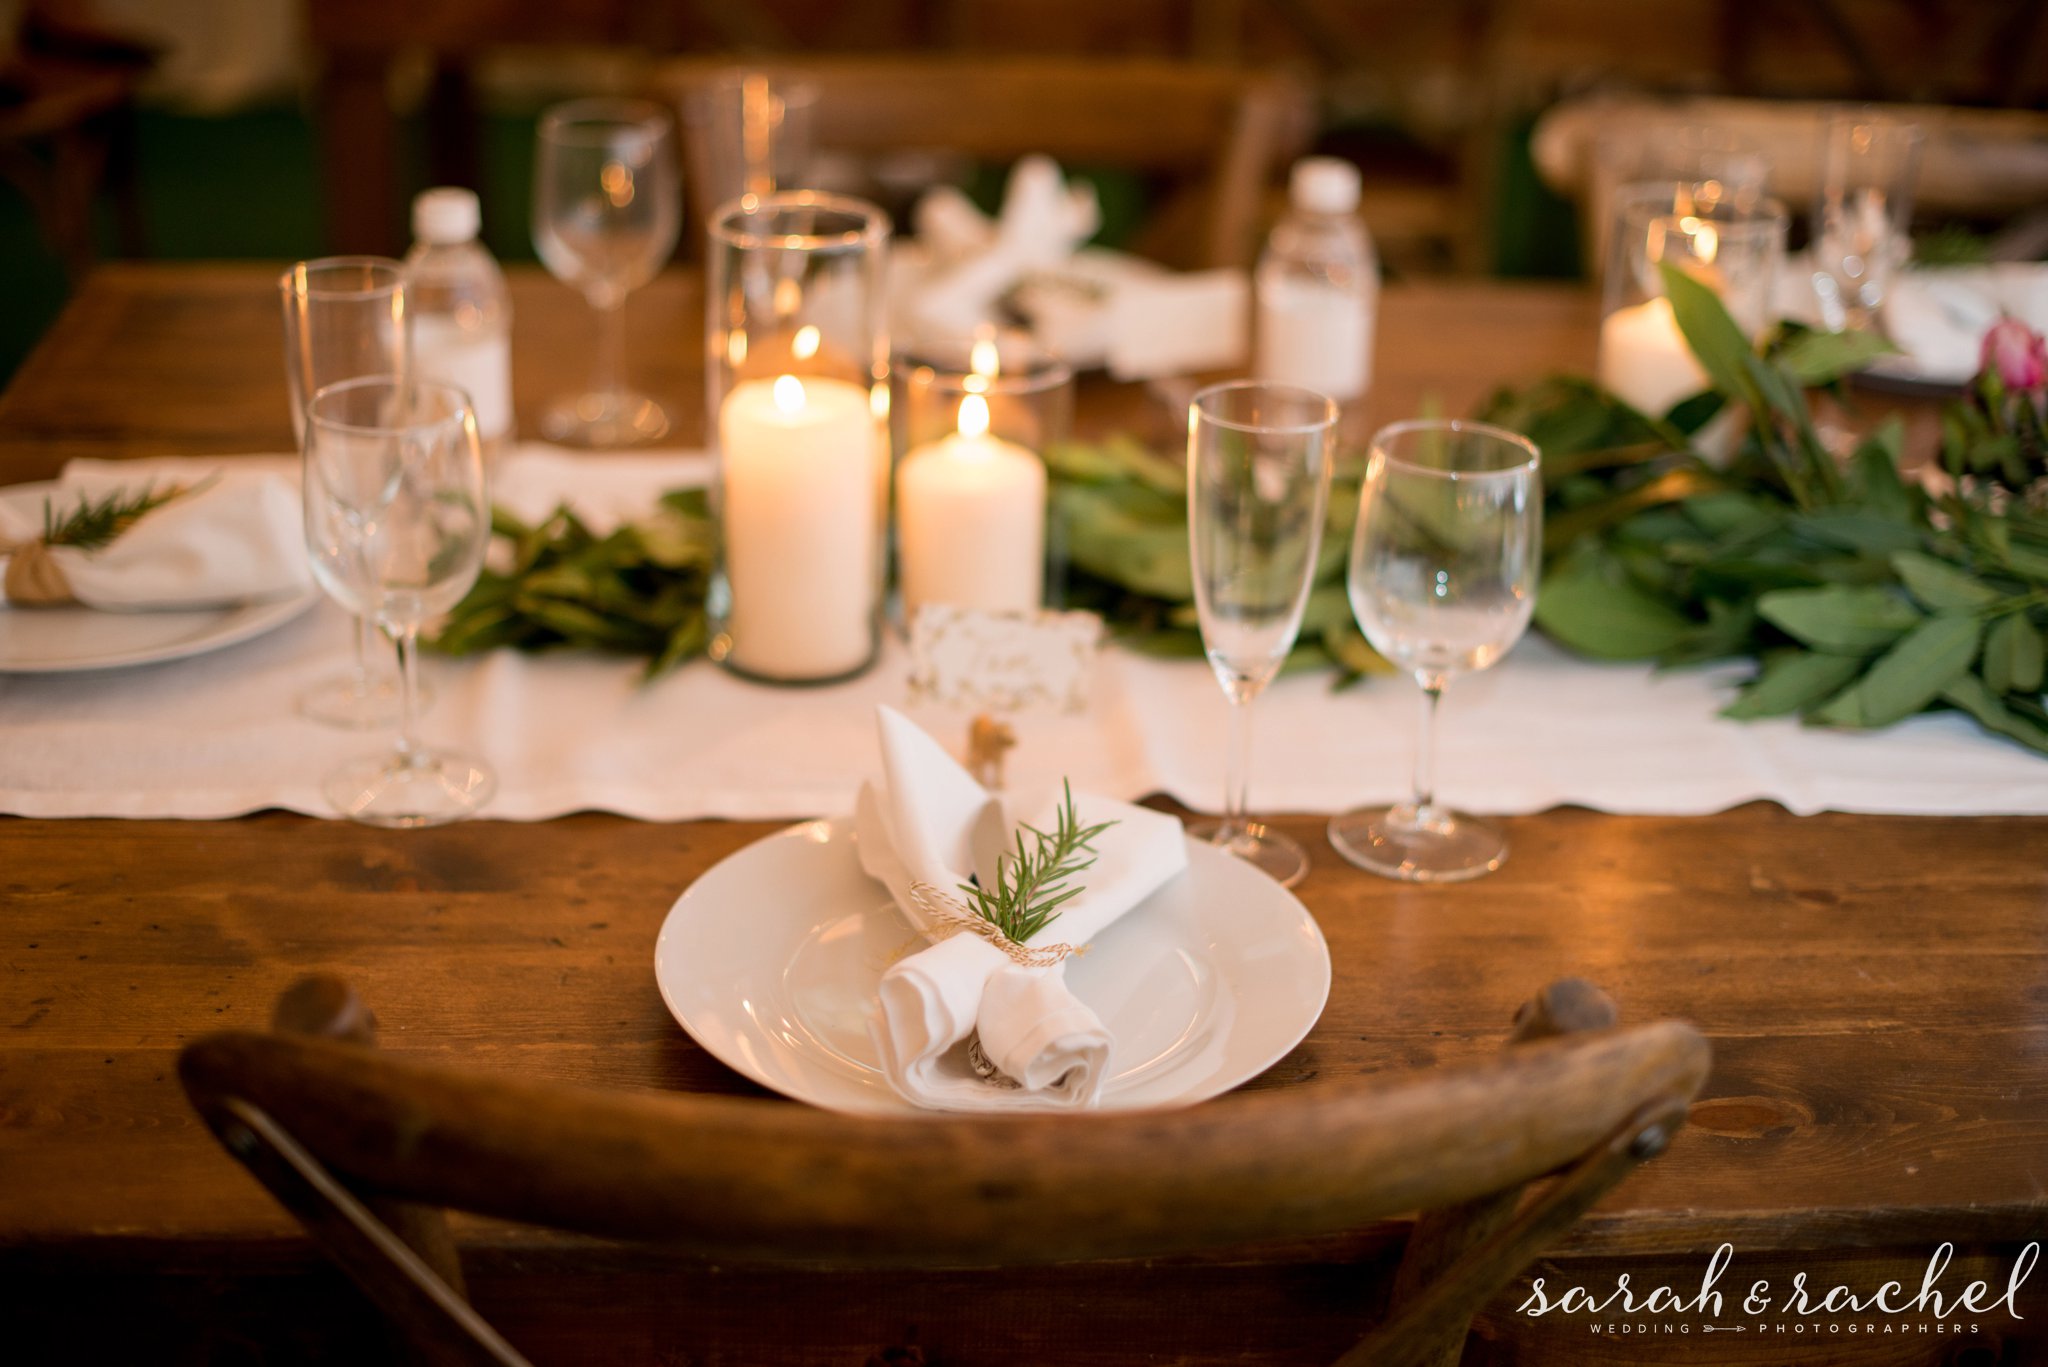 gorgeous barn wood tables wedding reception greenery and dog statue name cards